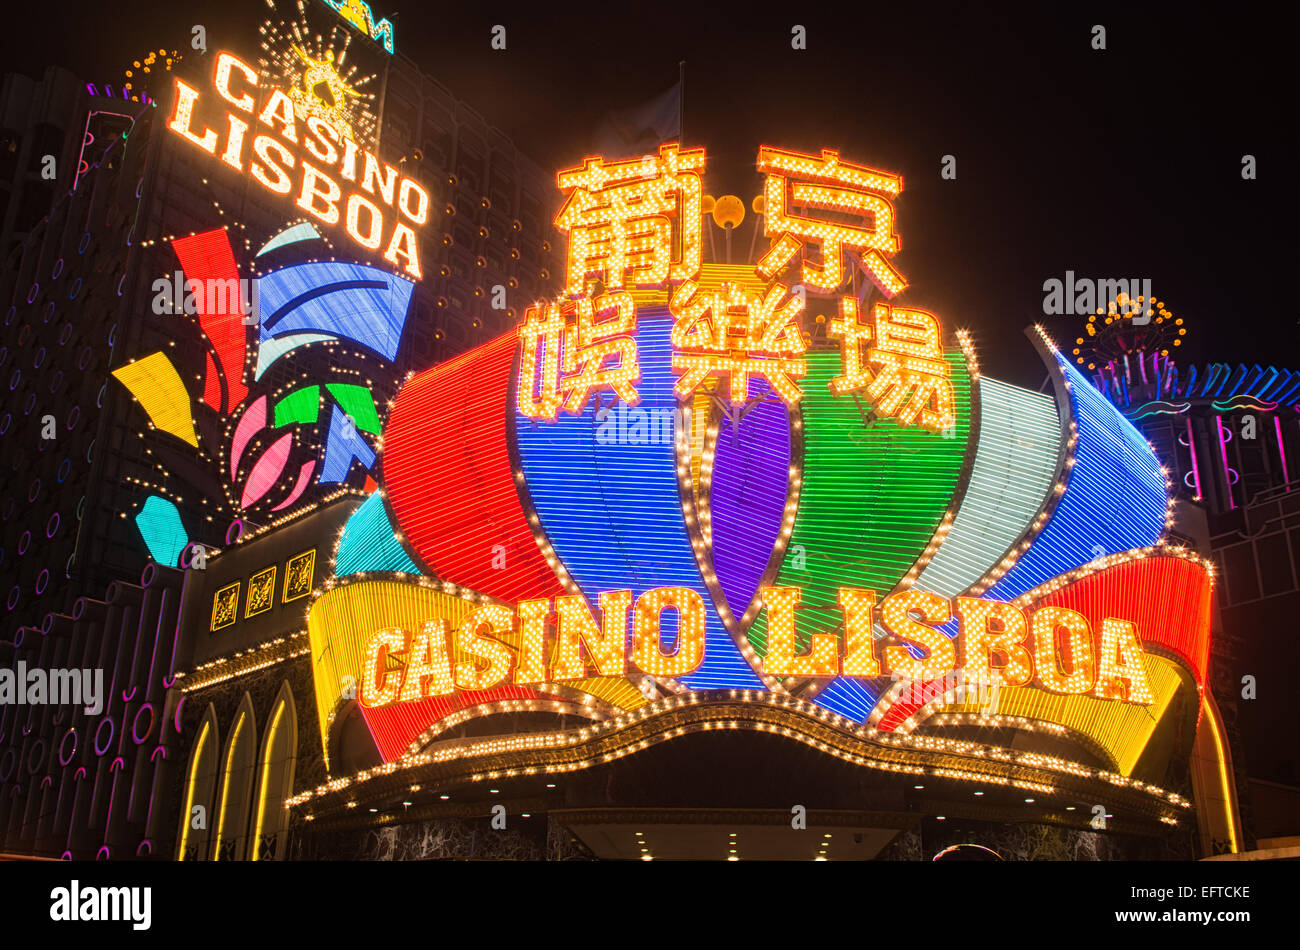 Colorful lighted image of the facade of Grand Lisboa Hotel and Casino in Macau at night Stock Photo